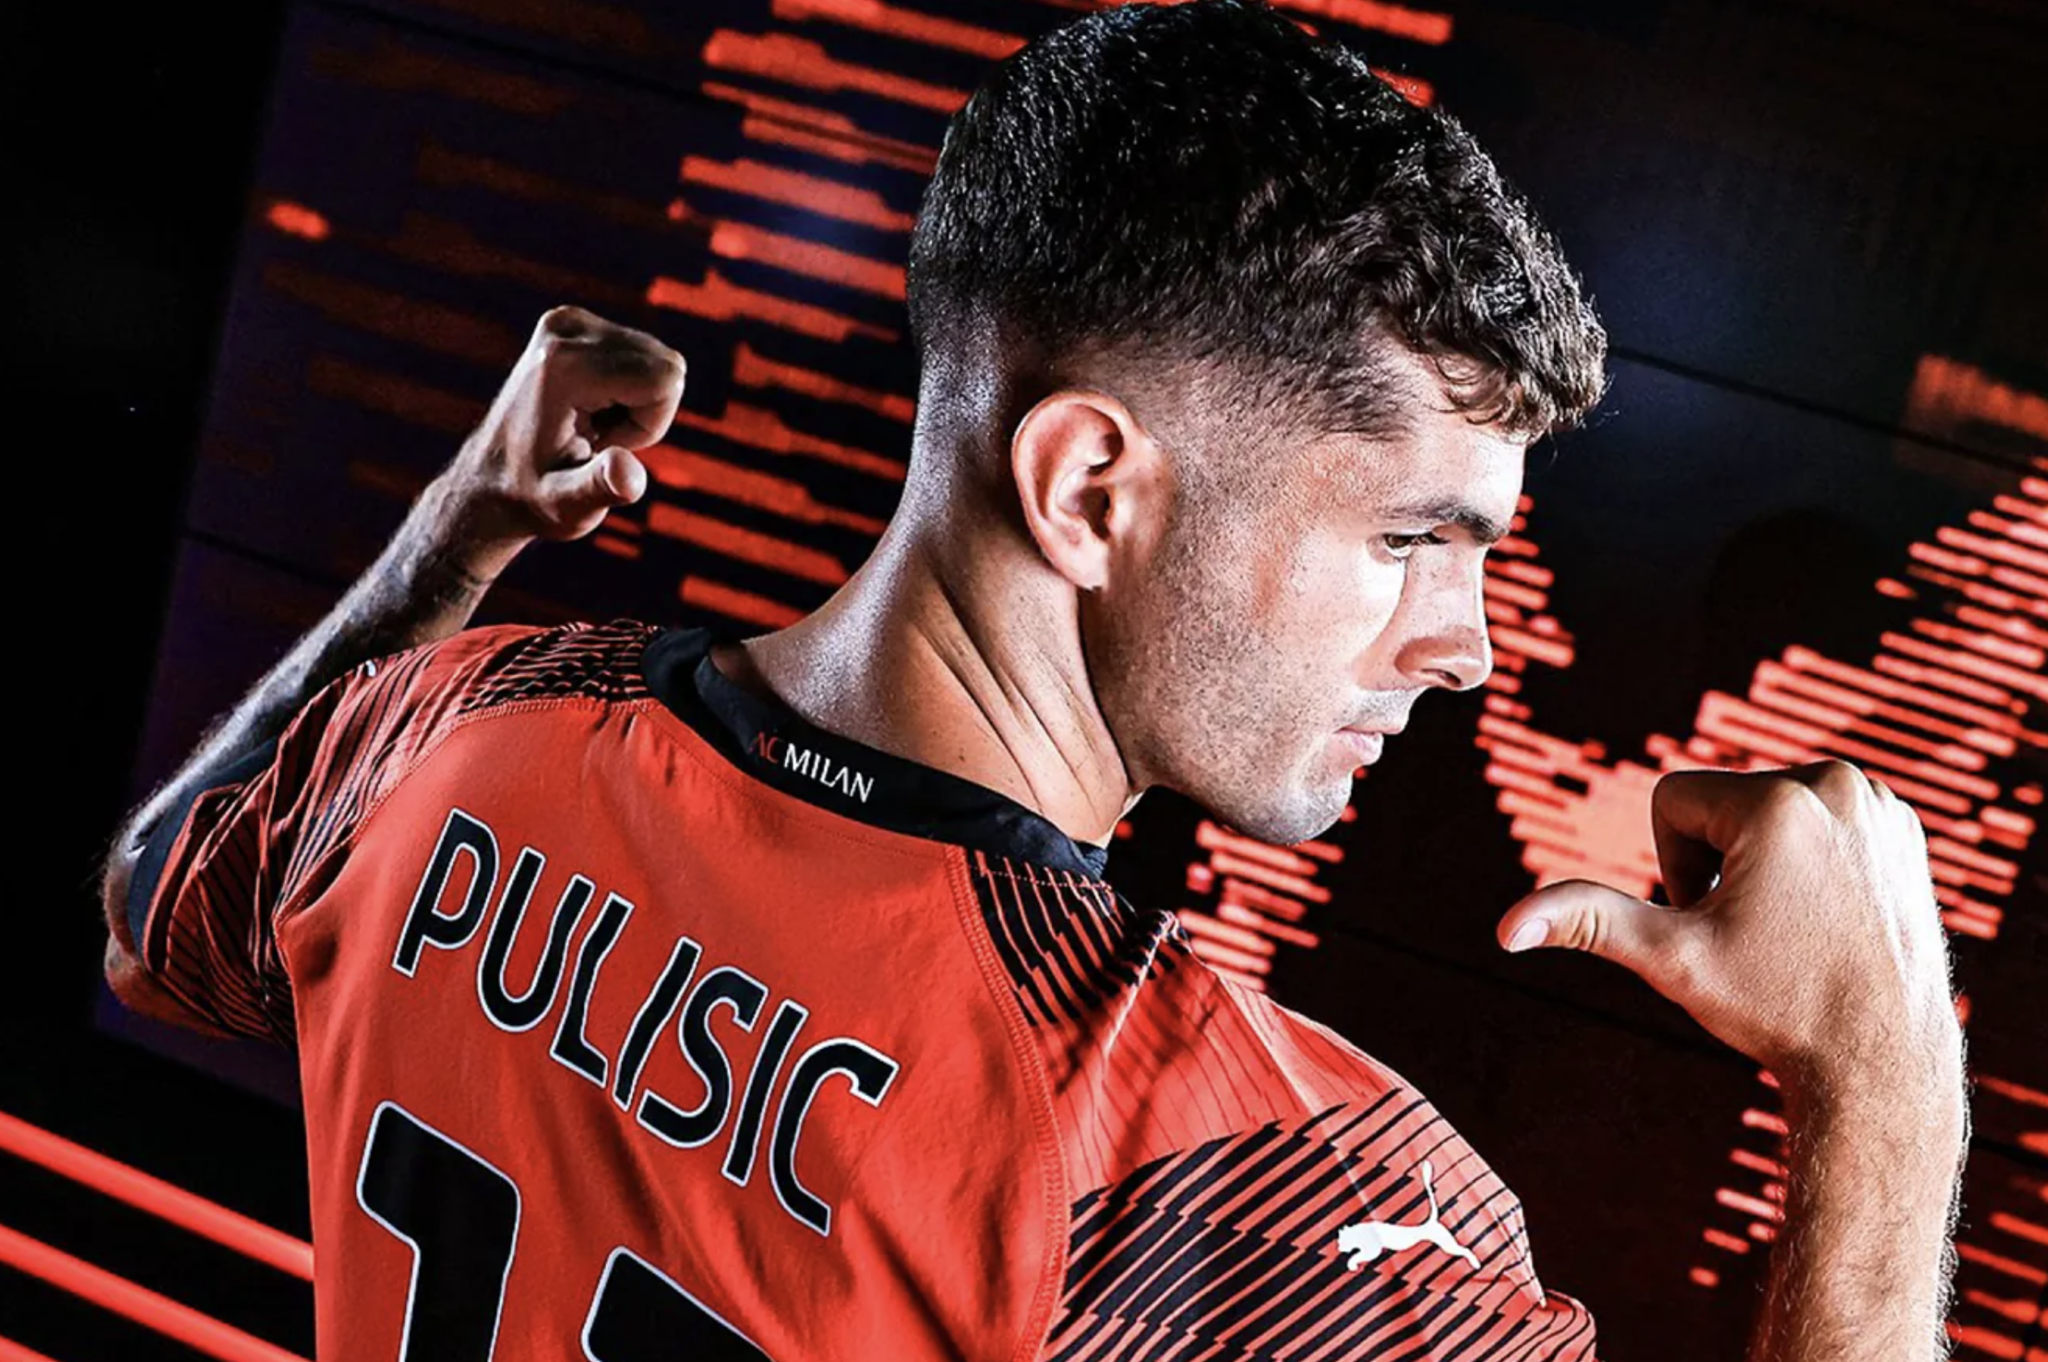 Pulisic has new lease of life at Milan and forgets Chelsea hell